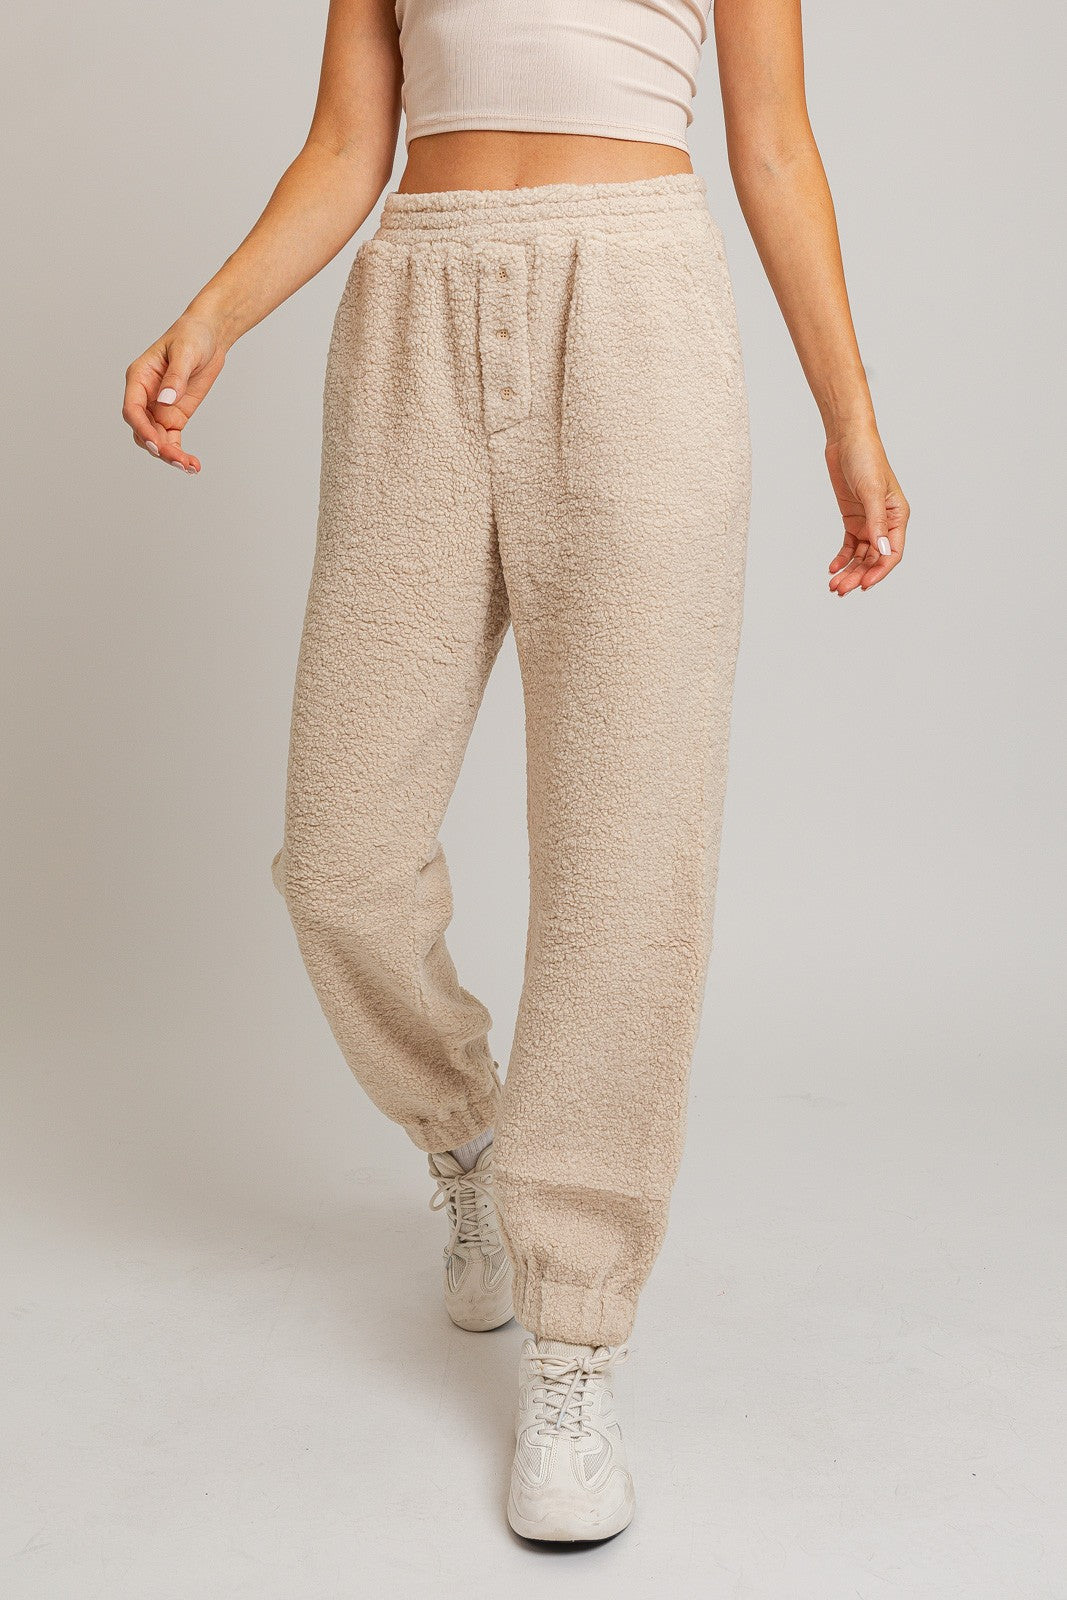 By The Fire Joggers